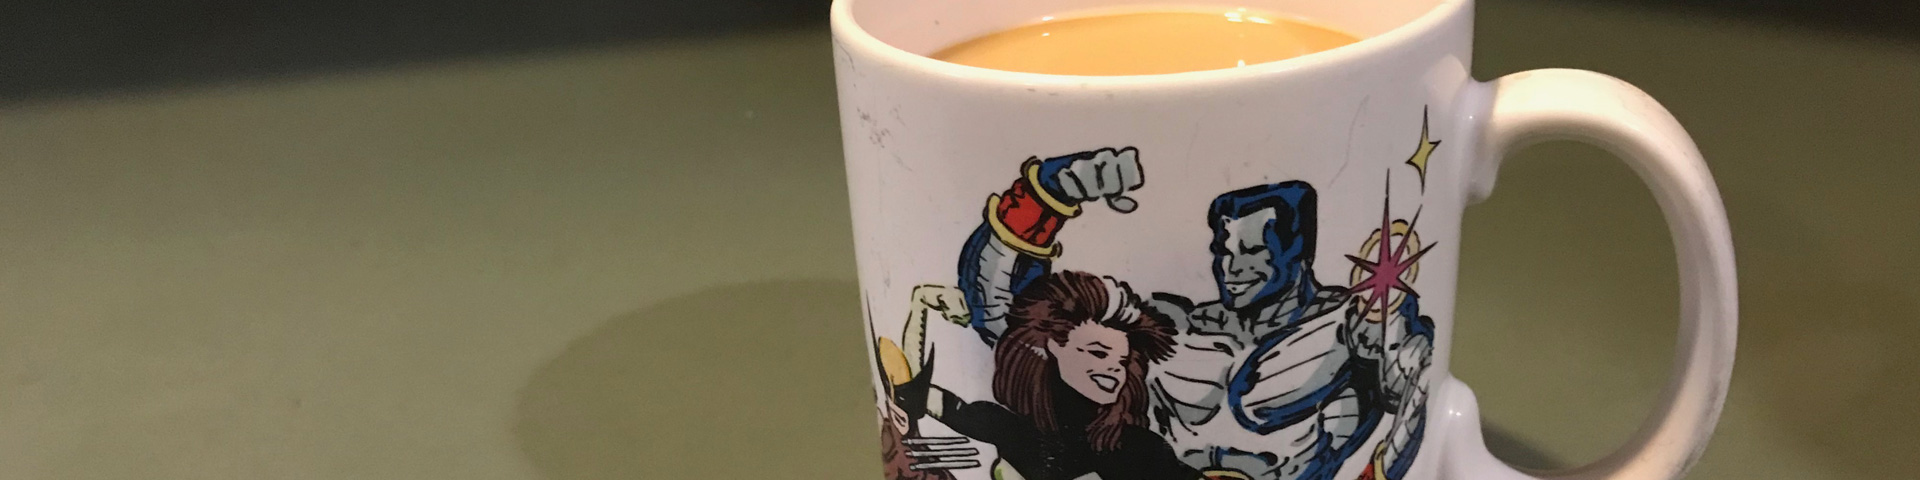 A coffee cup featuring the X-men appears on a green counter top.